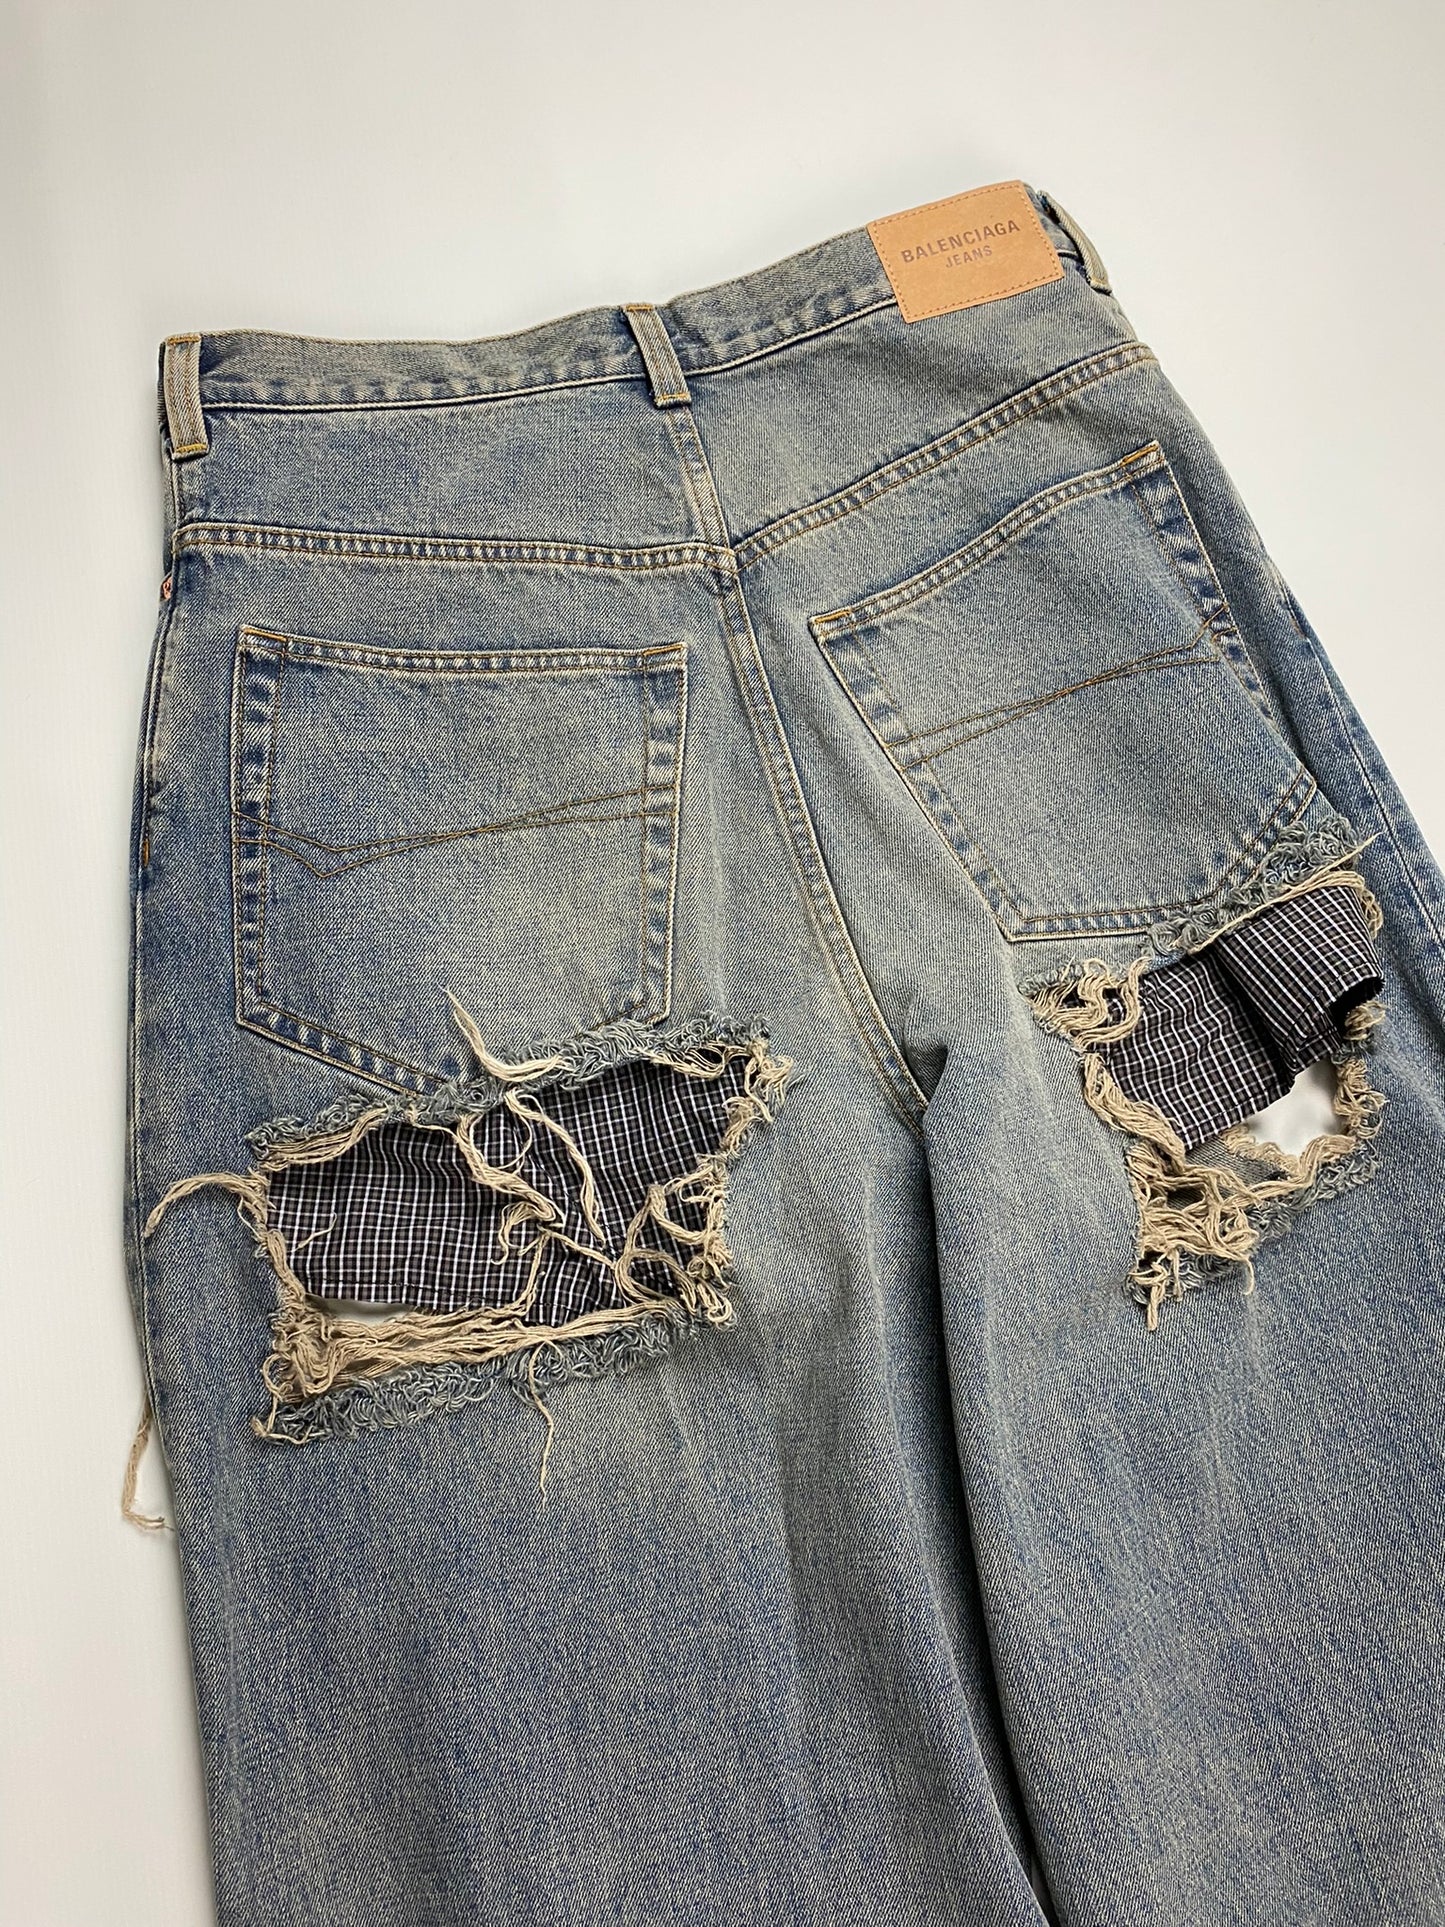 Balenciaga AW21 destroyed shredded torn boxers Jeans in blue SZ:S|M